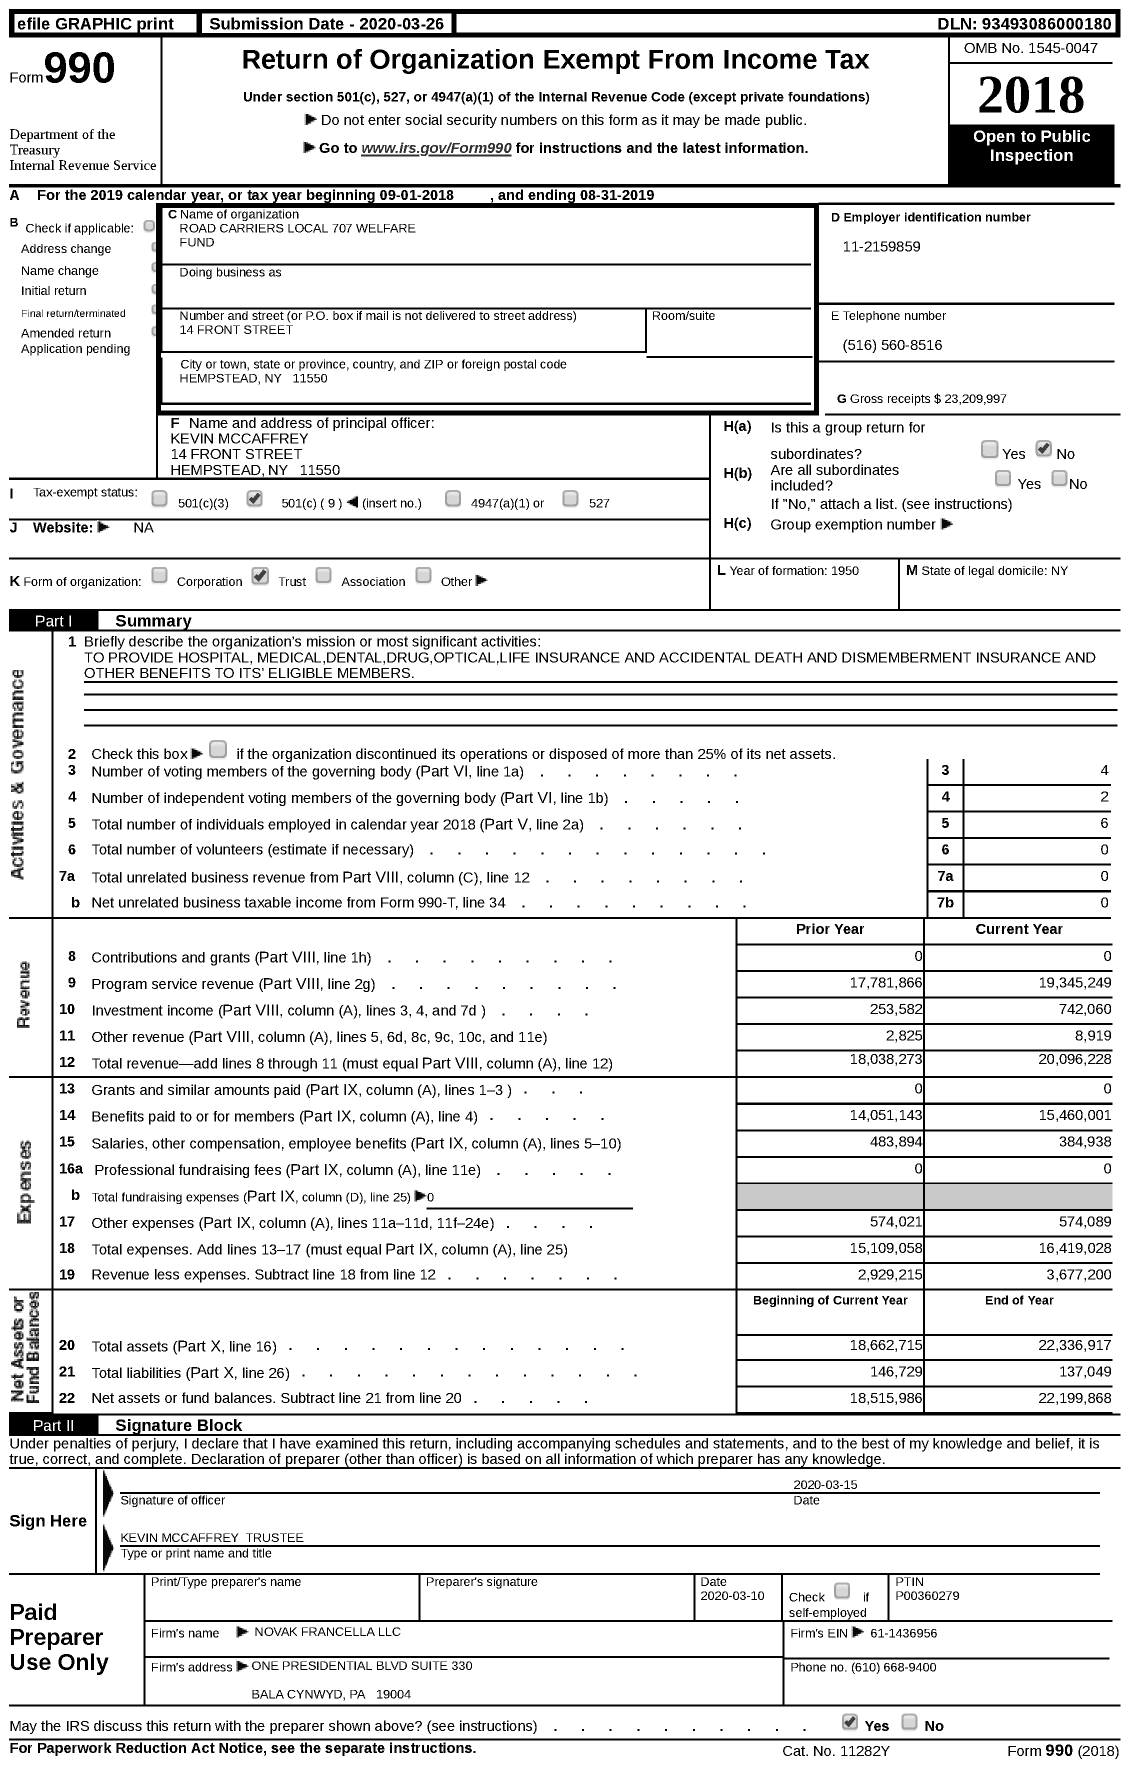 Image of first page of 2018 Form 990 for Road Carriers Local 707 Welfare Fund